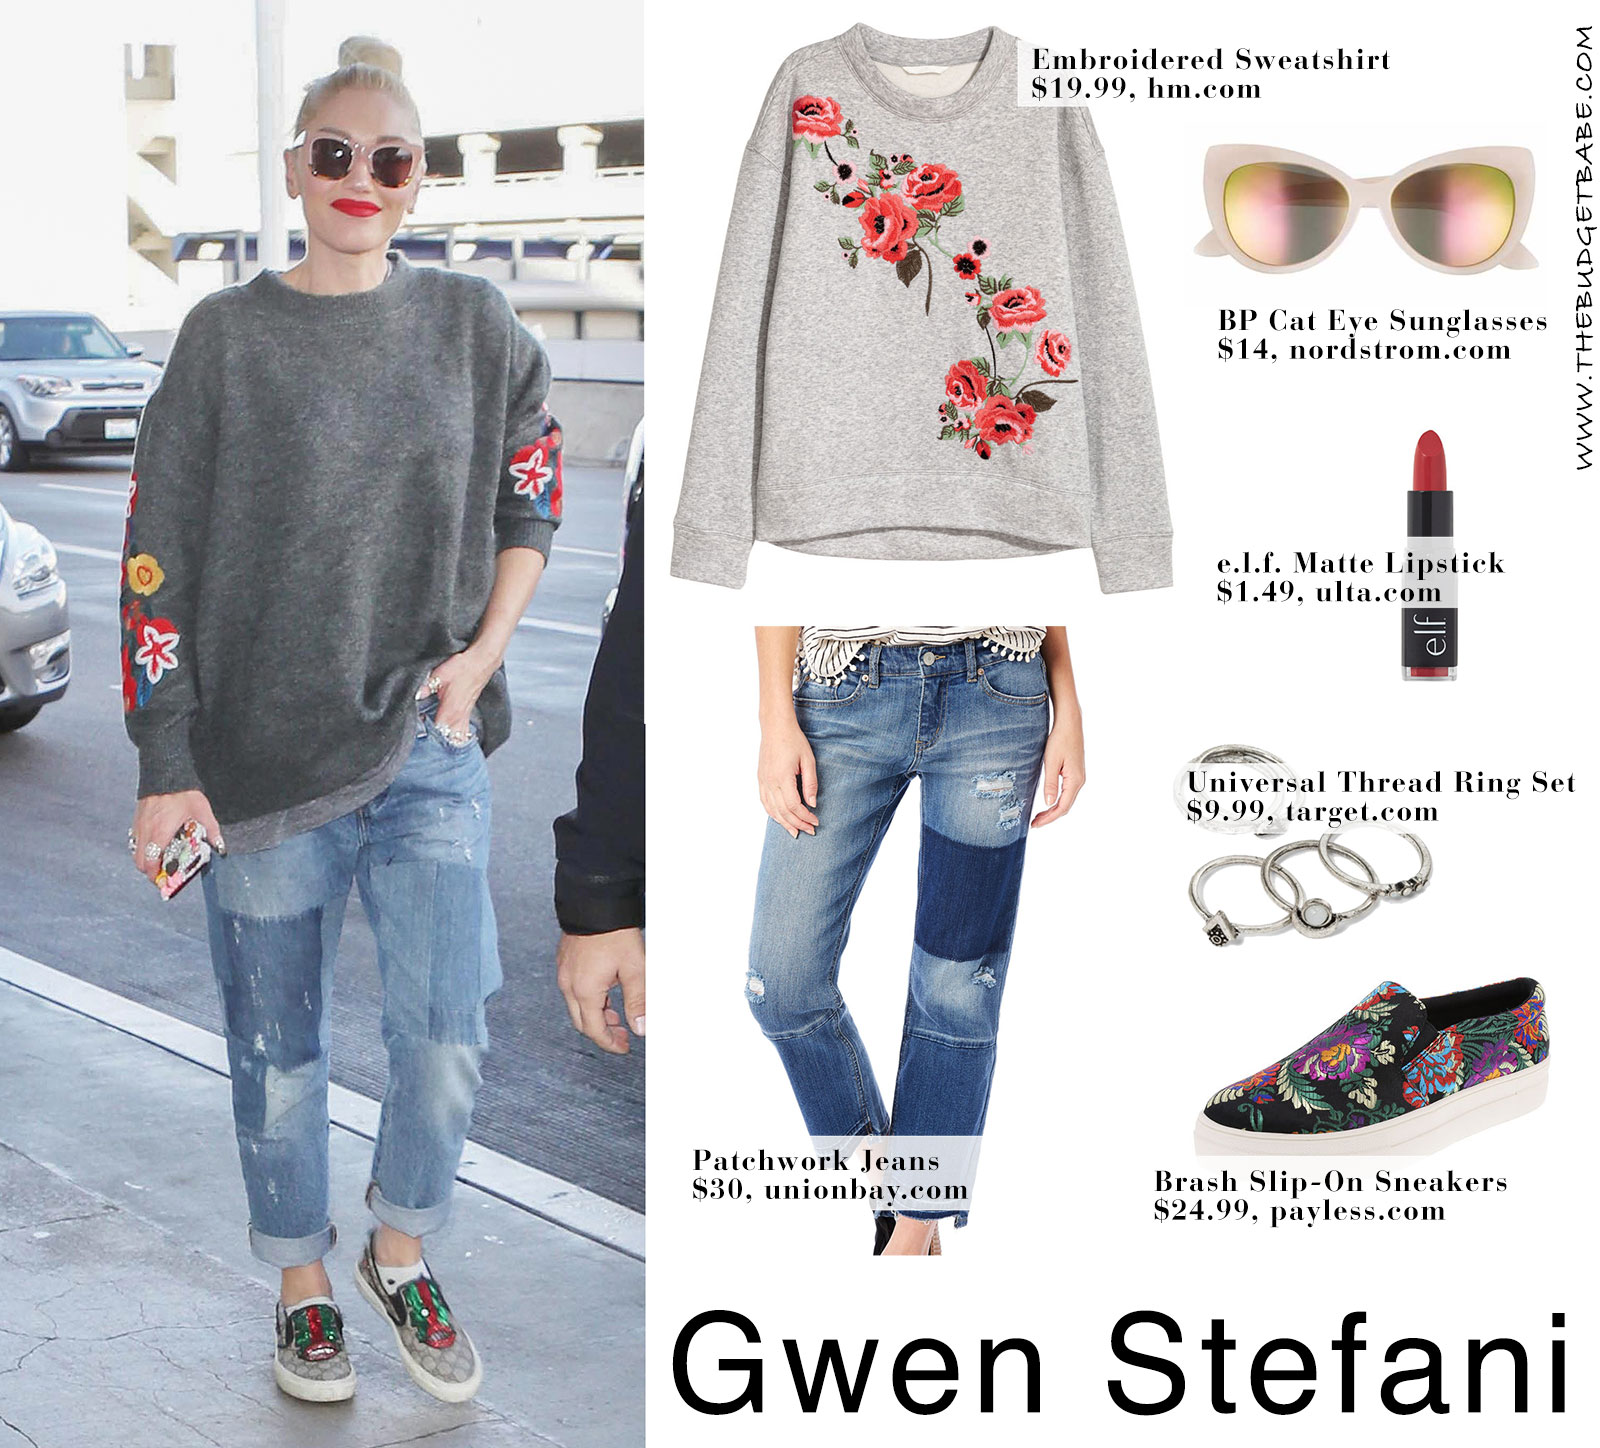 Gwen Stefani's floral embroidered sweatshirt and Gucci sneakers look for less